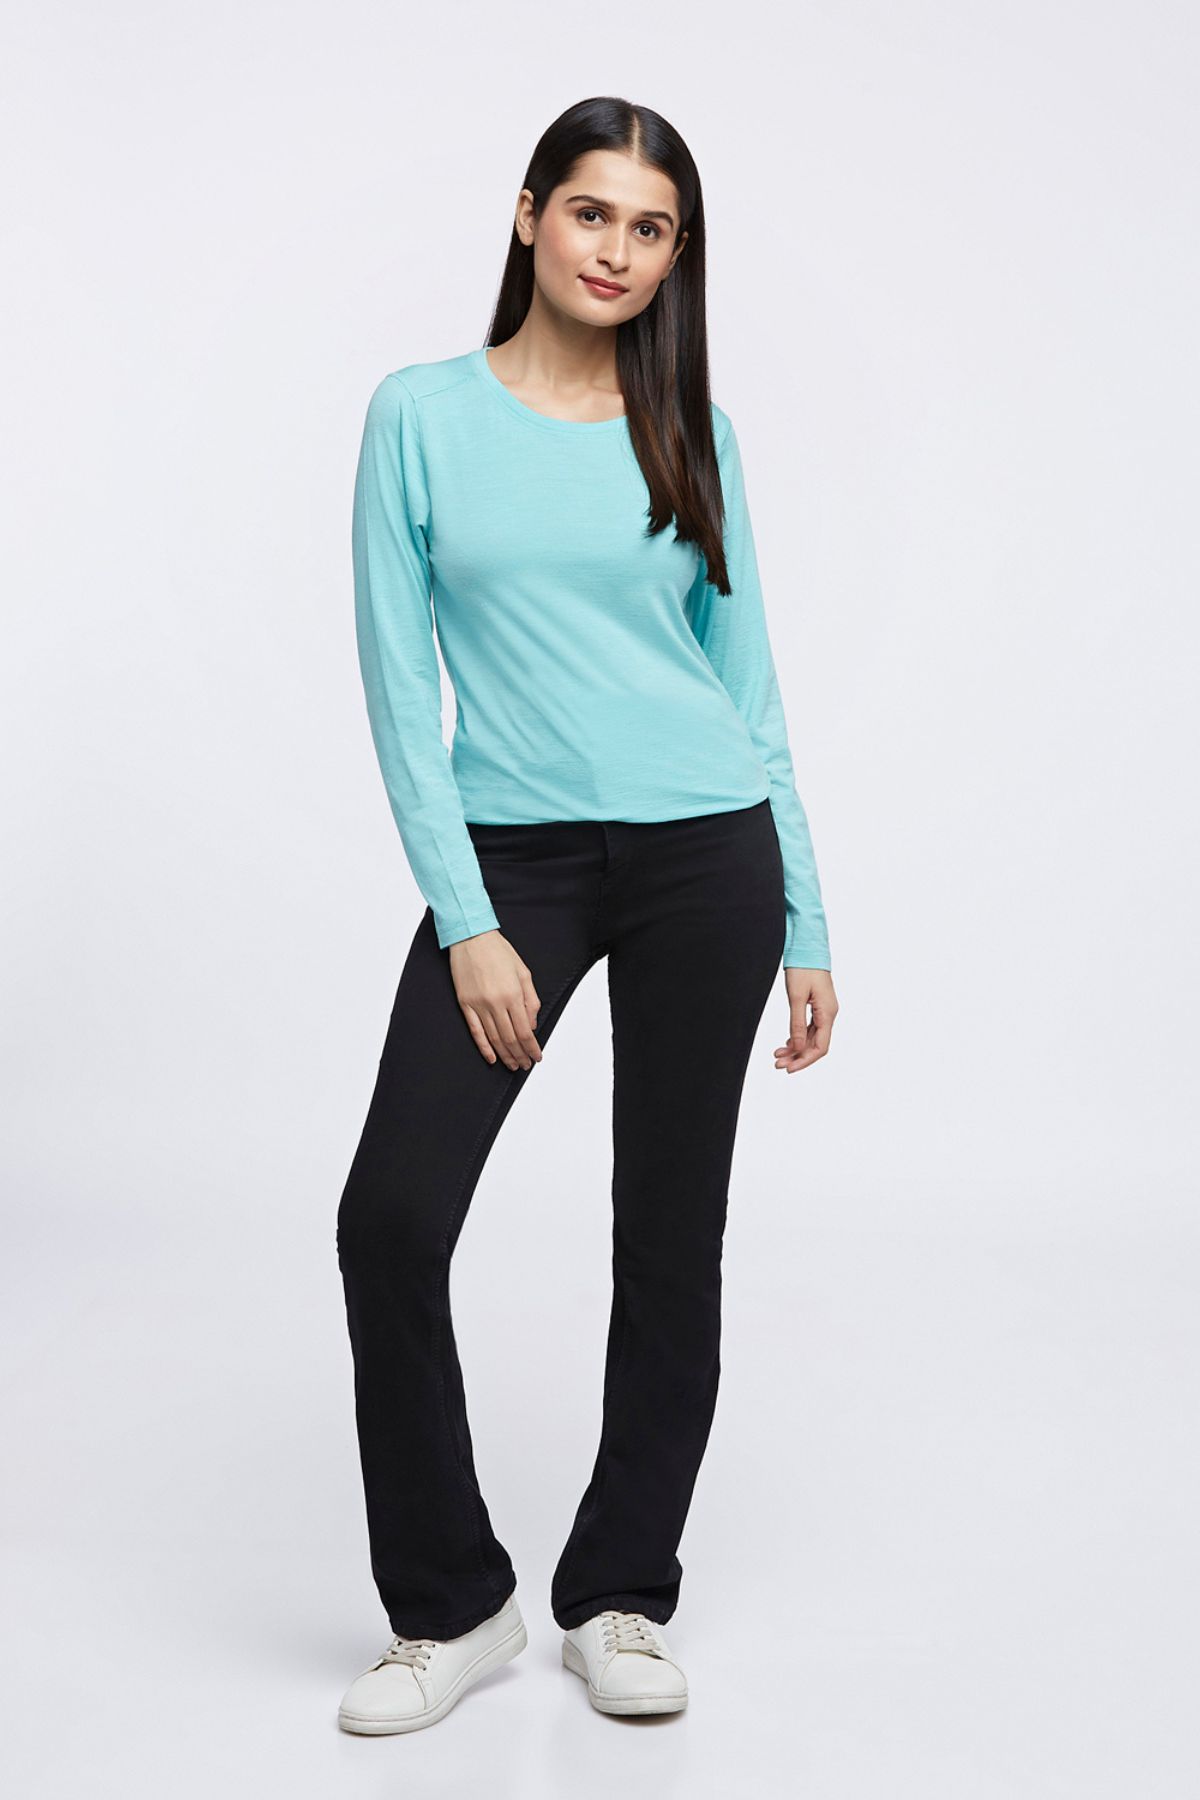 Women's Thermal Wear Online: Low Price Offer on Thermal Wear for ...